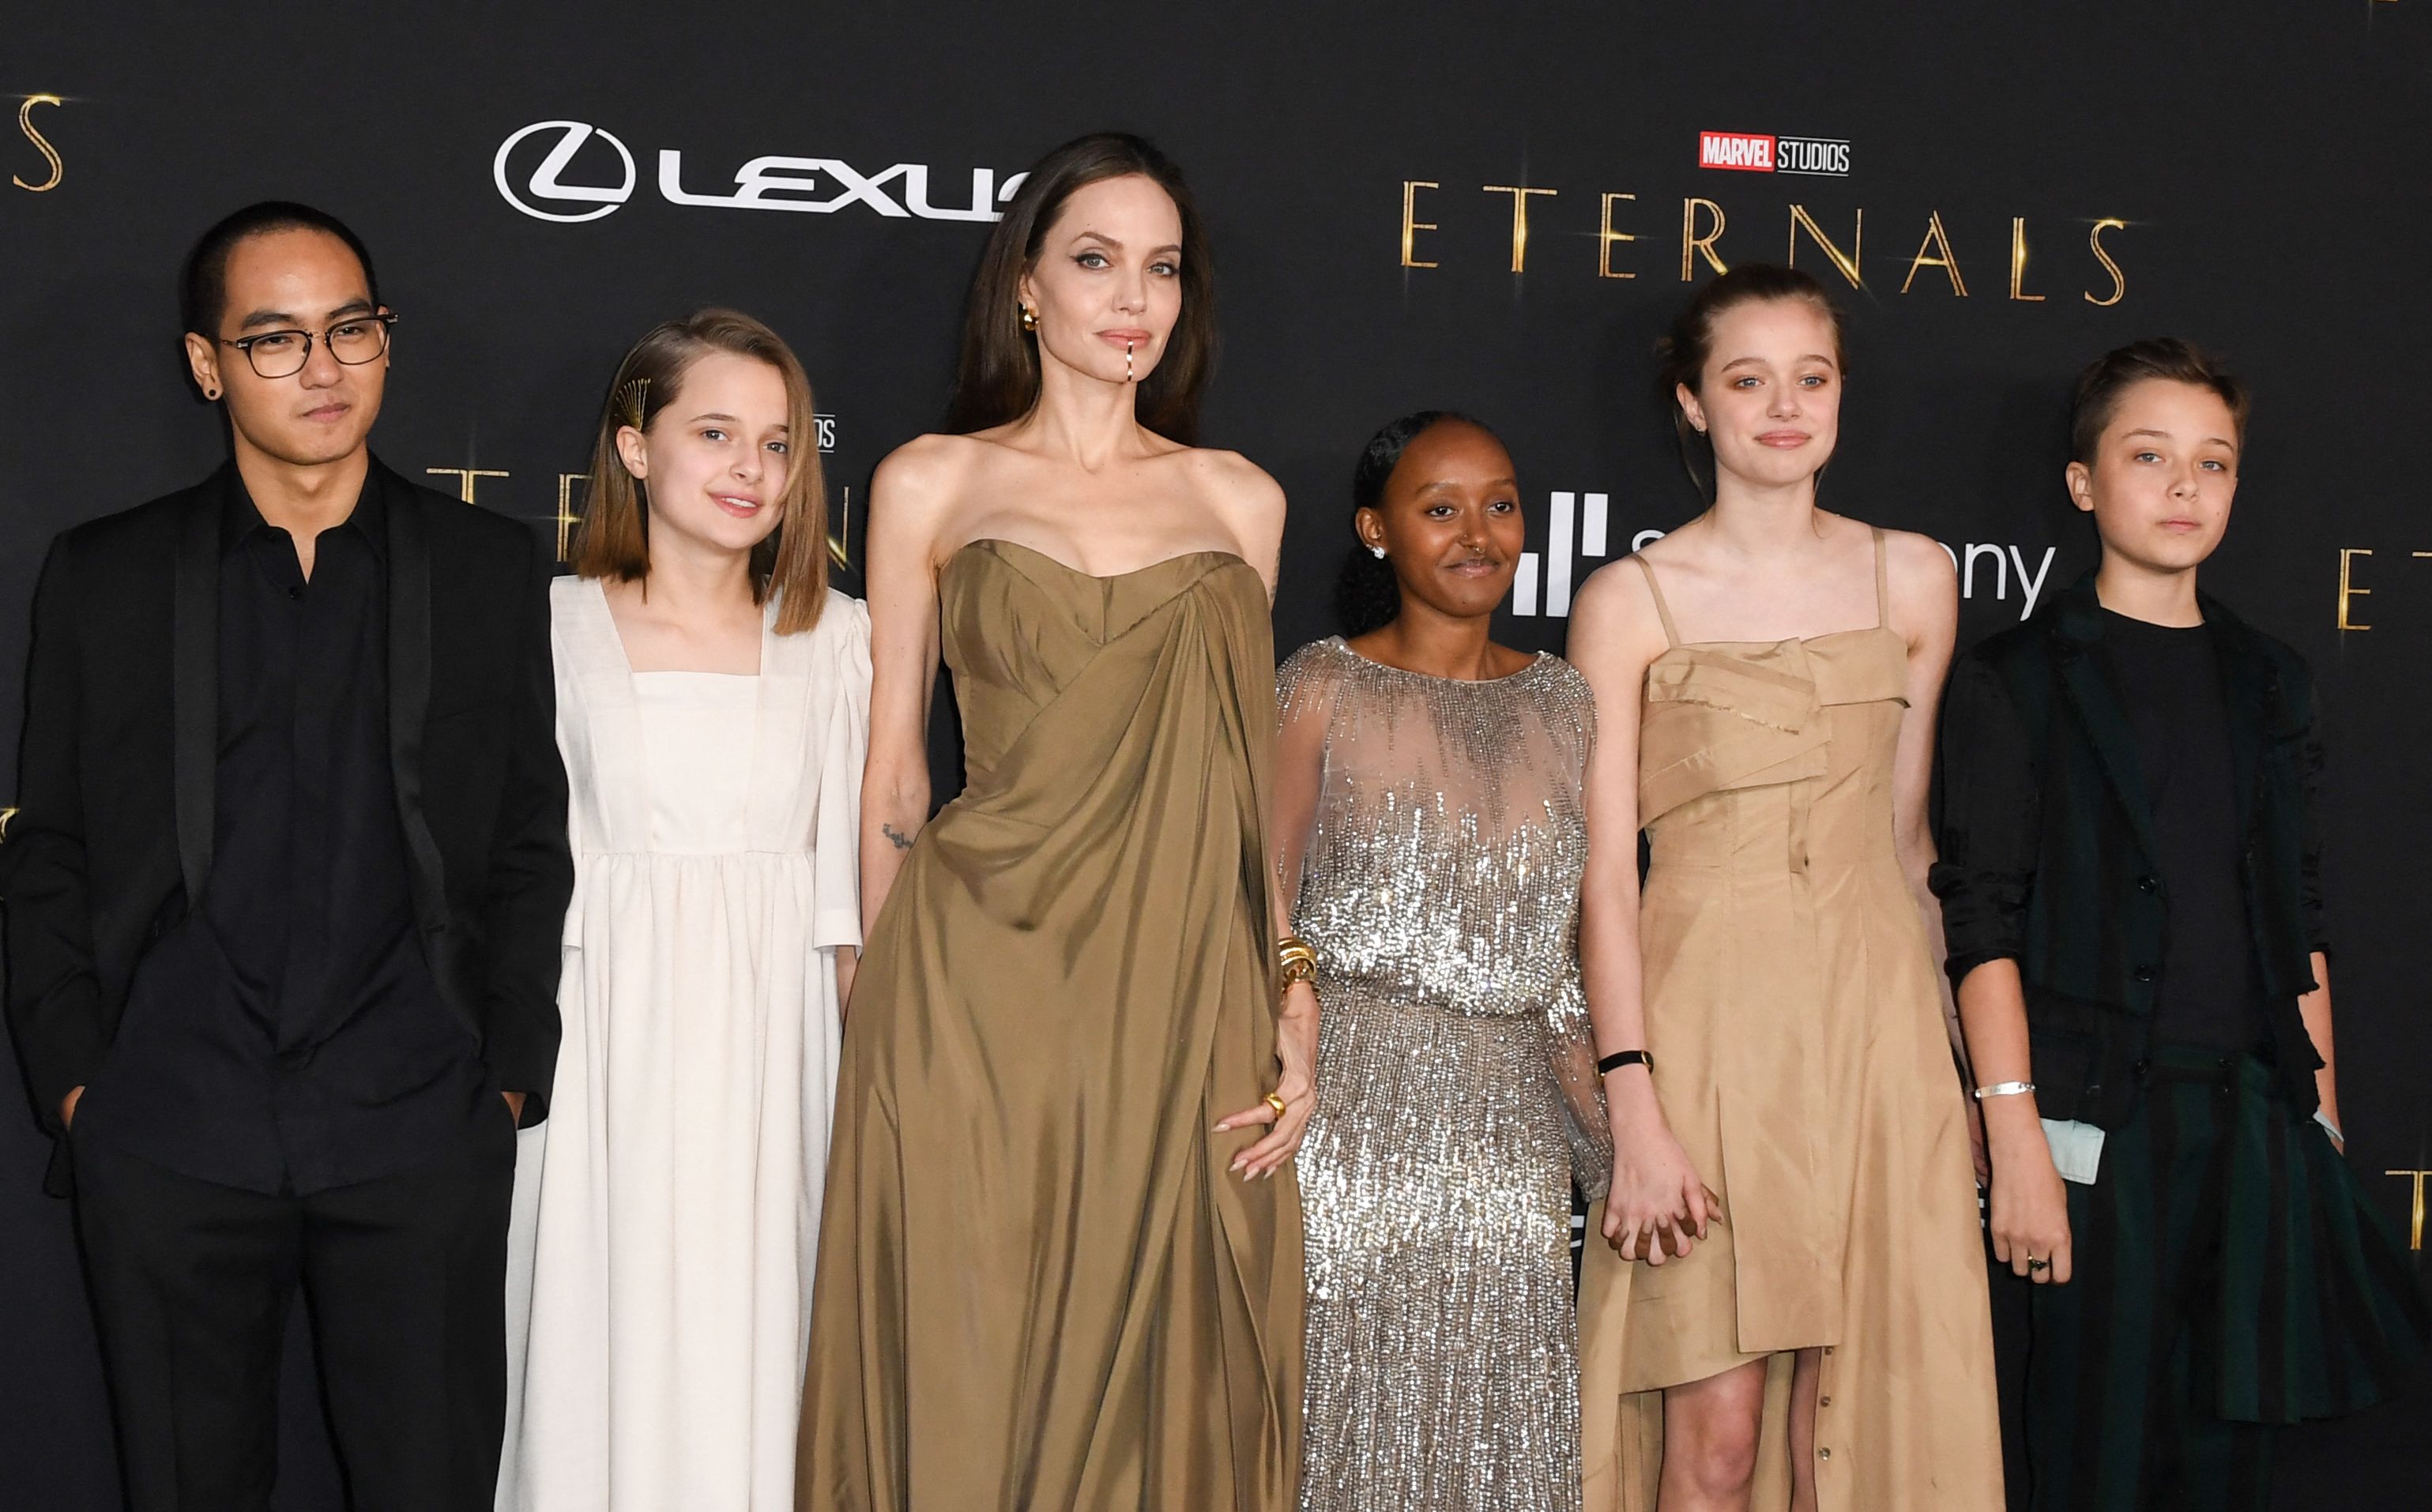 US actress Angelina Jolie and her children Maddox, Vivienne, Zahara, Shiloh, and Knox arrive for the world premiere of Marvel Studios' "Eternals" at the Dolby theatre in Los Angeles, October 18, 2021. | Source: Getty Images